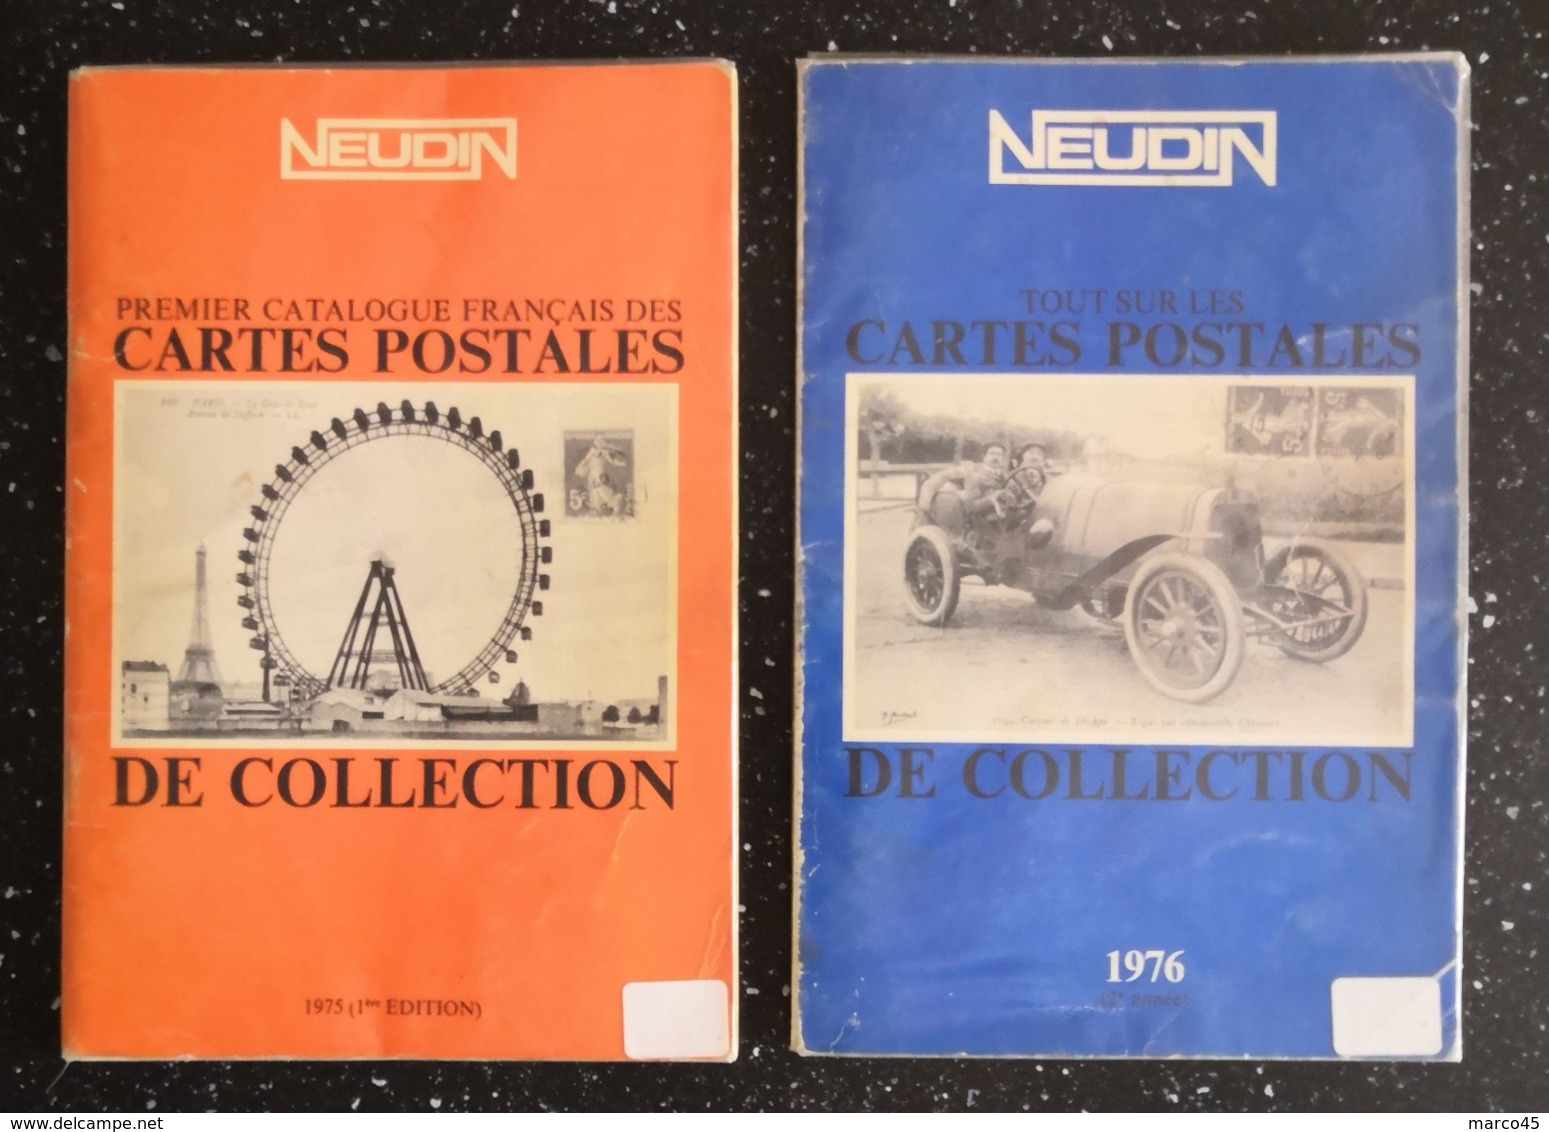 COLLECTION OUVRAGES NEUDIN & FILDIER - AU TOTAL 51 VOLUMES - Libri & Cataloghi